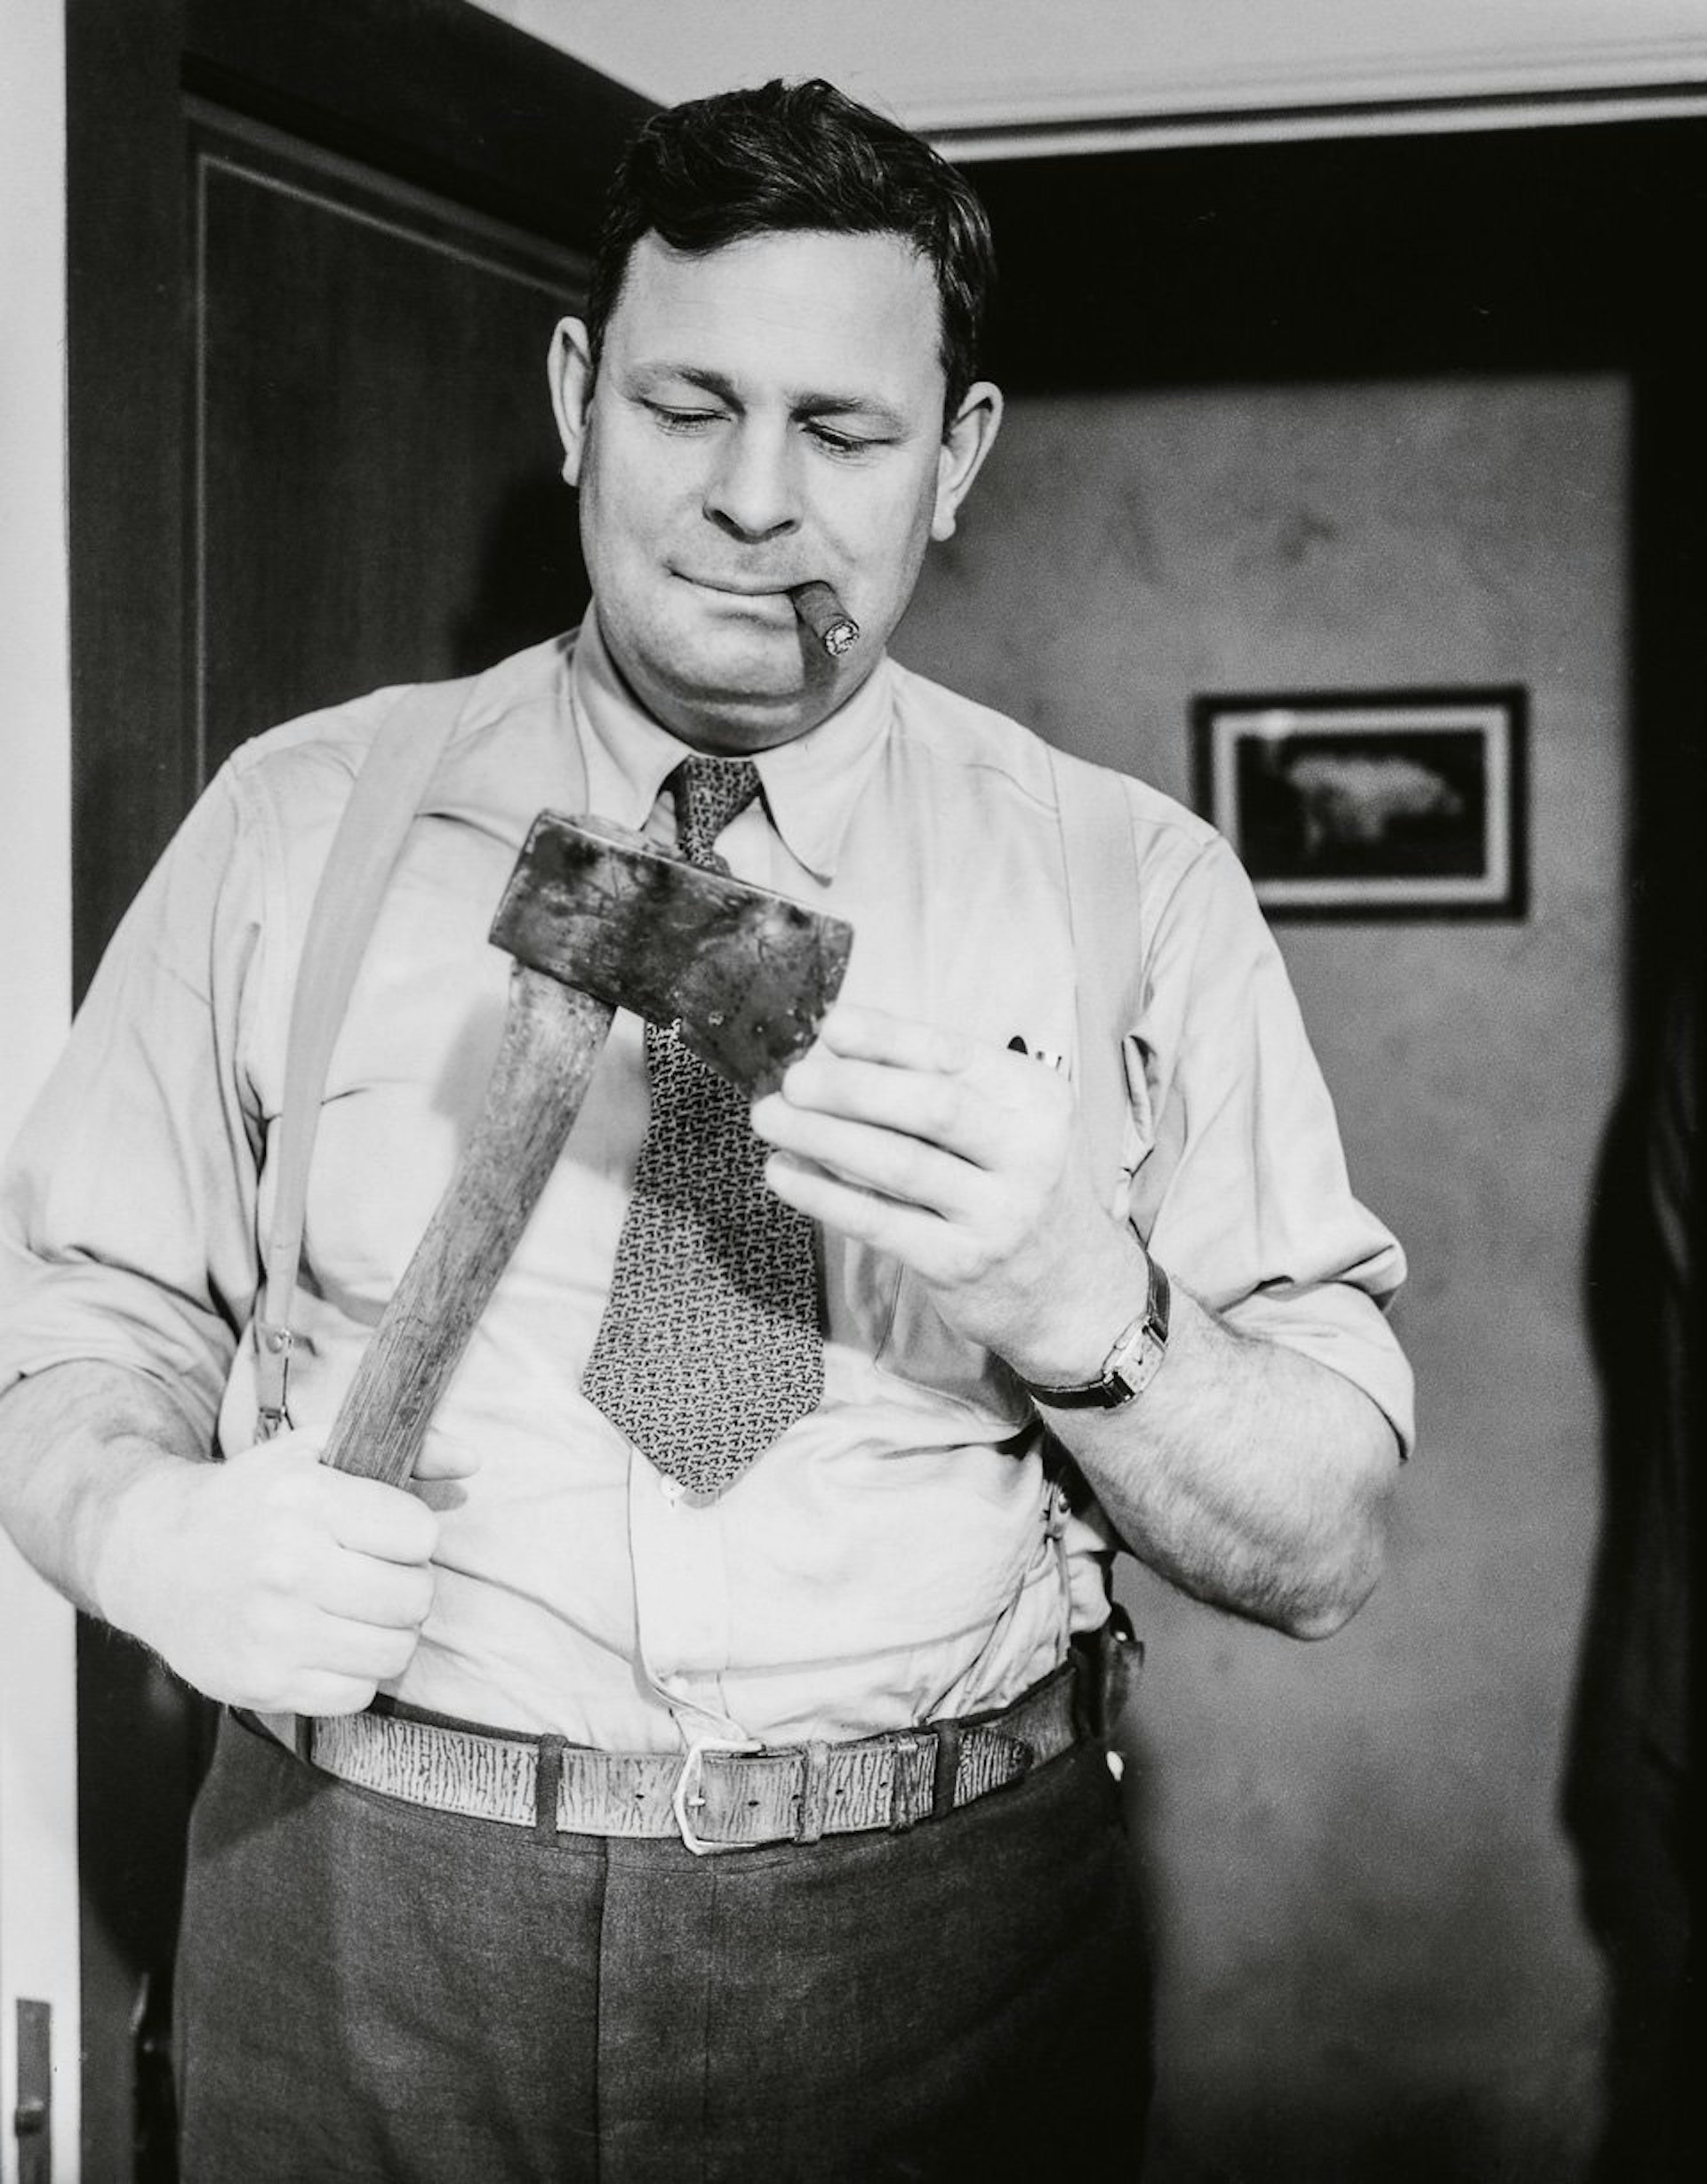 A cigar-chomping detective examines the murder weapon, ca. 1940. Copyright: Cliff Wesselmann Photo Courtesy of Gregory Paul Williams, BL Press LLC / TASCHEN